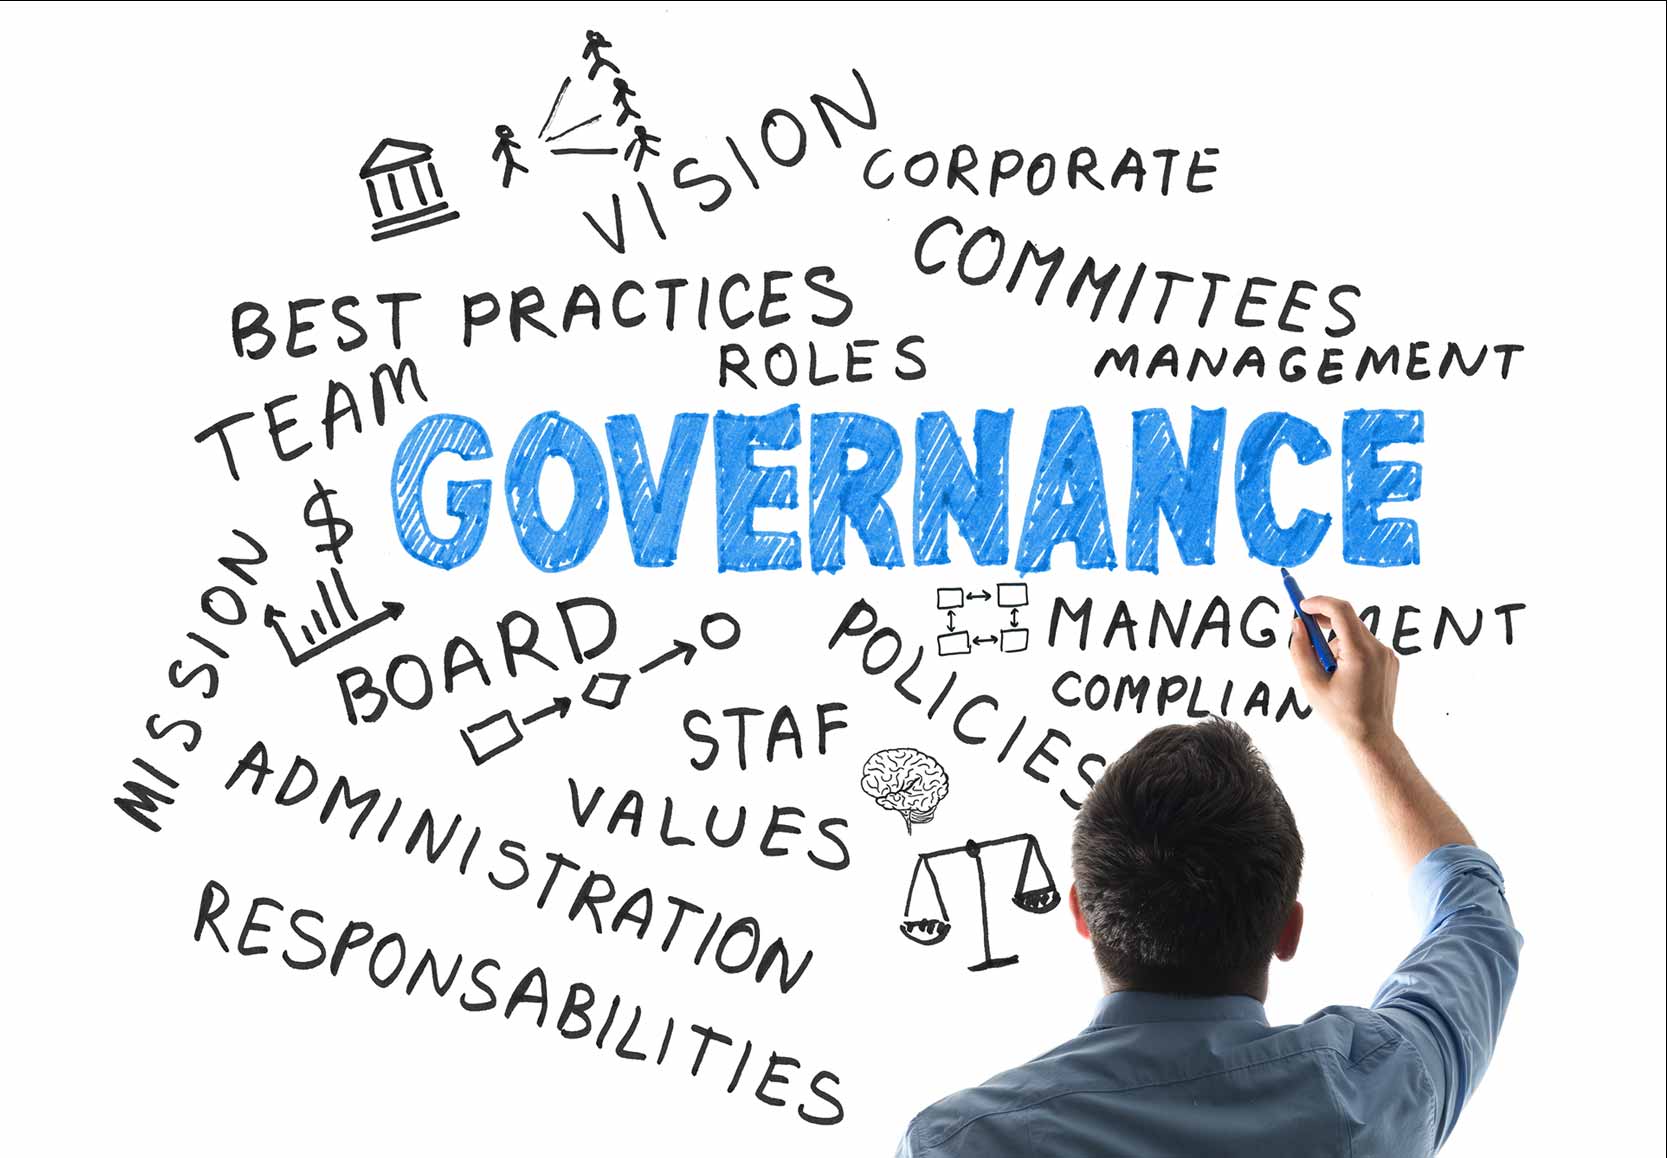 Governance: how should we think about ‘perfect’?